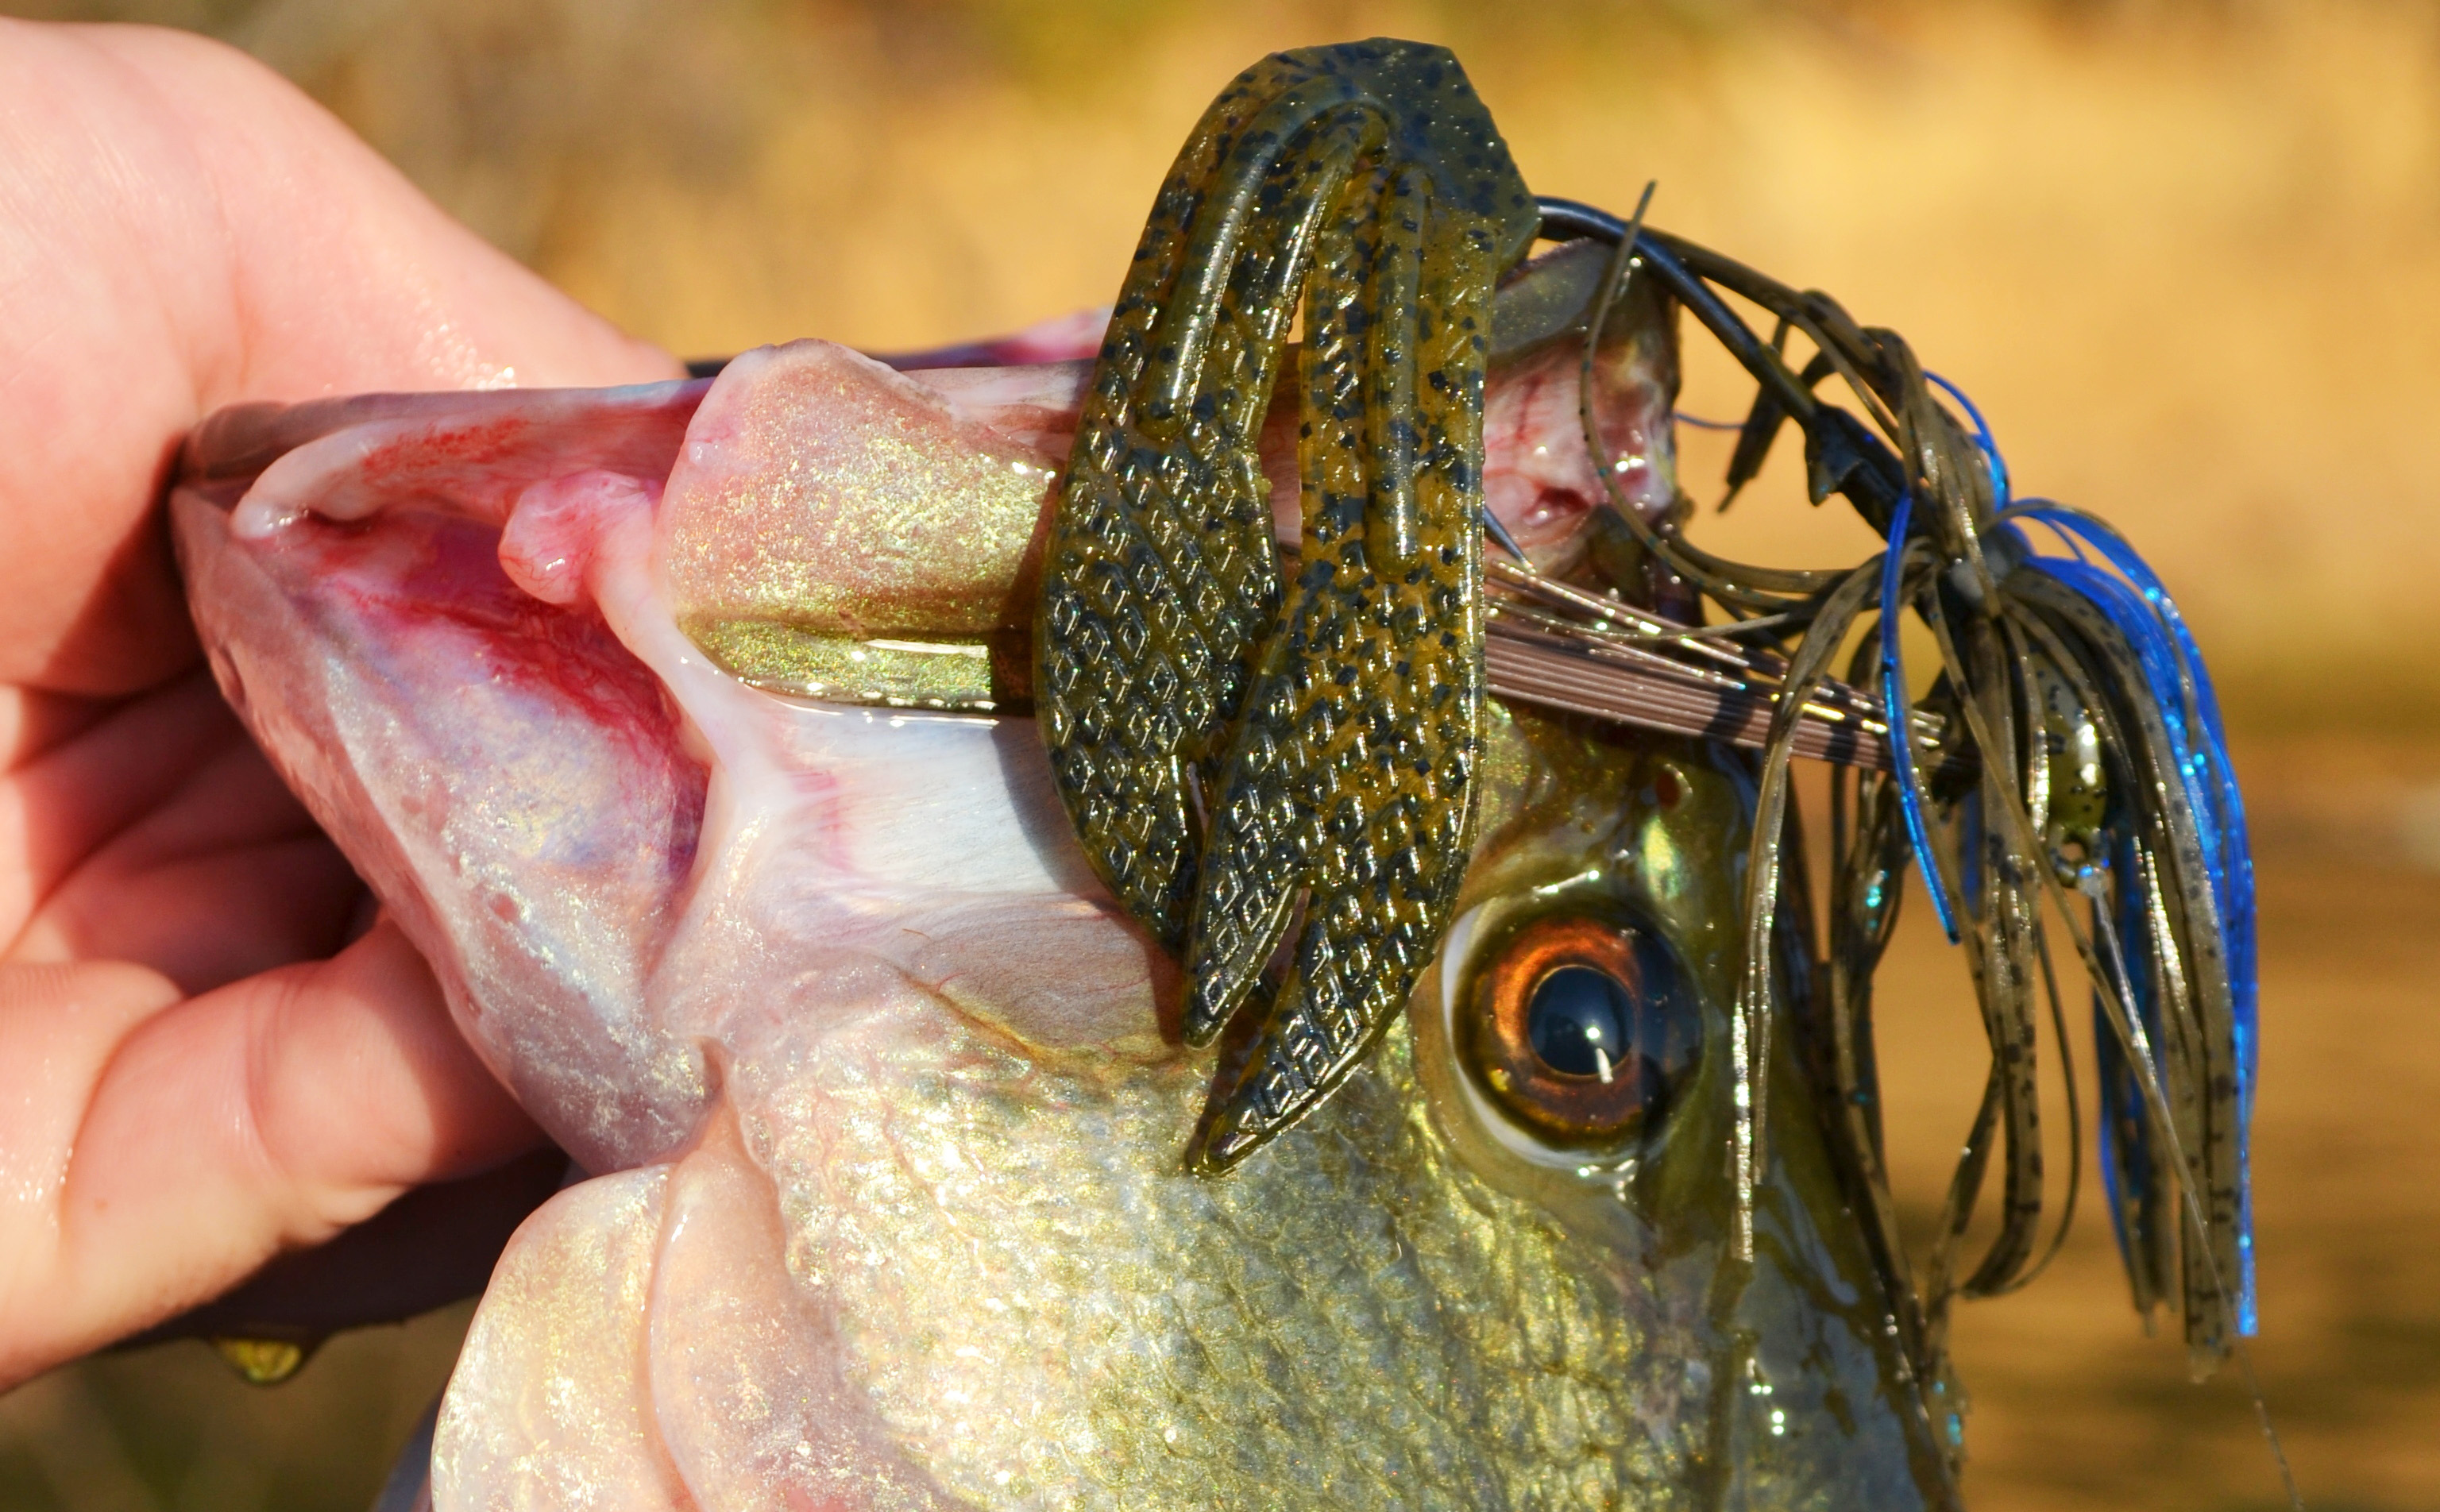 BIG GAME LURES & JIGS